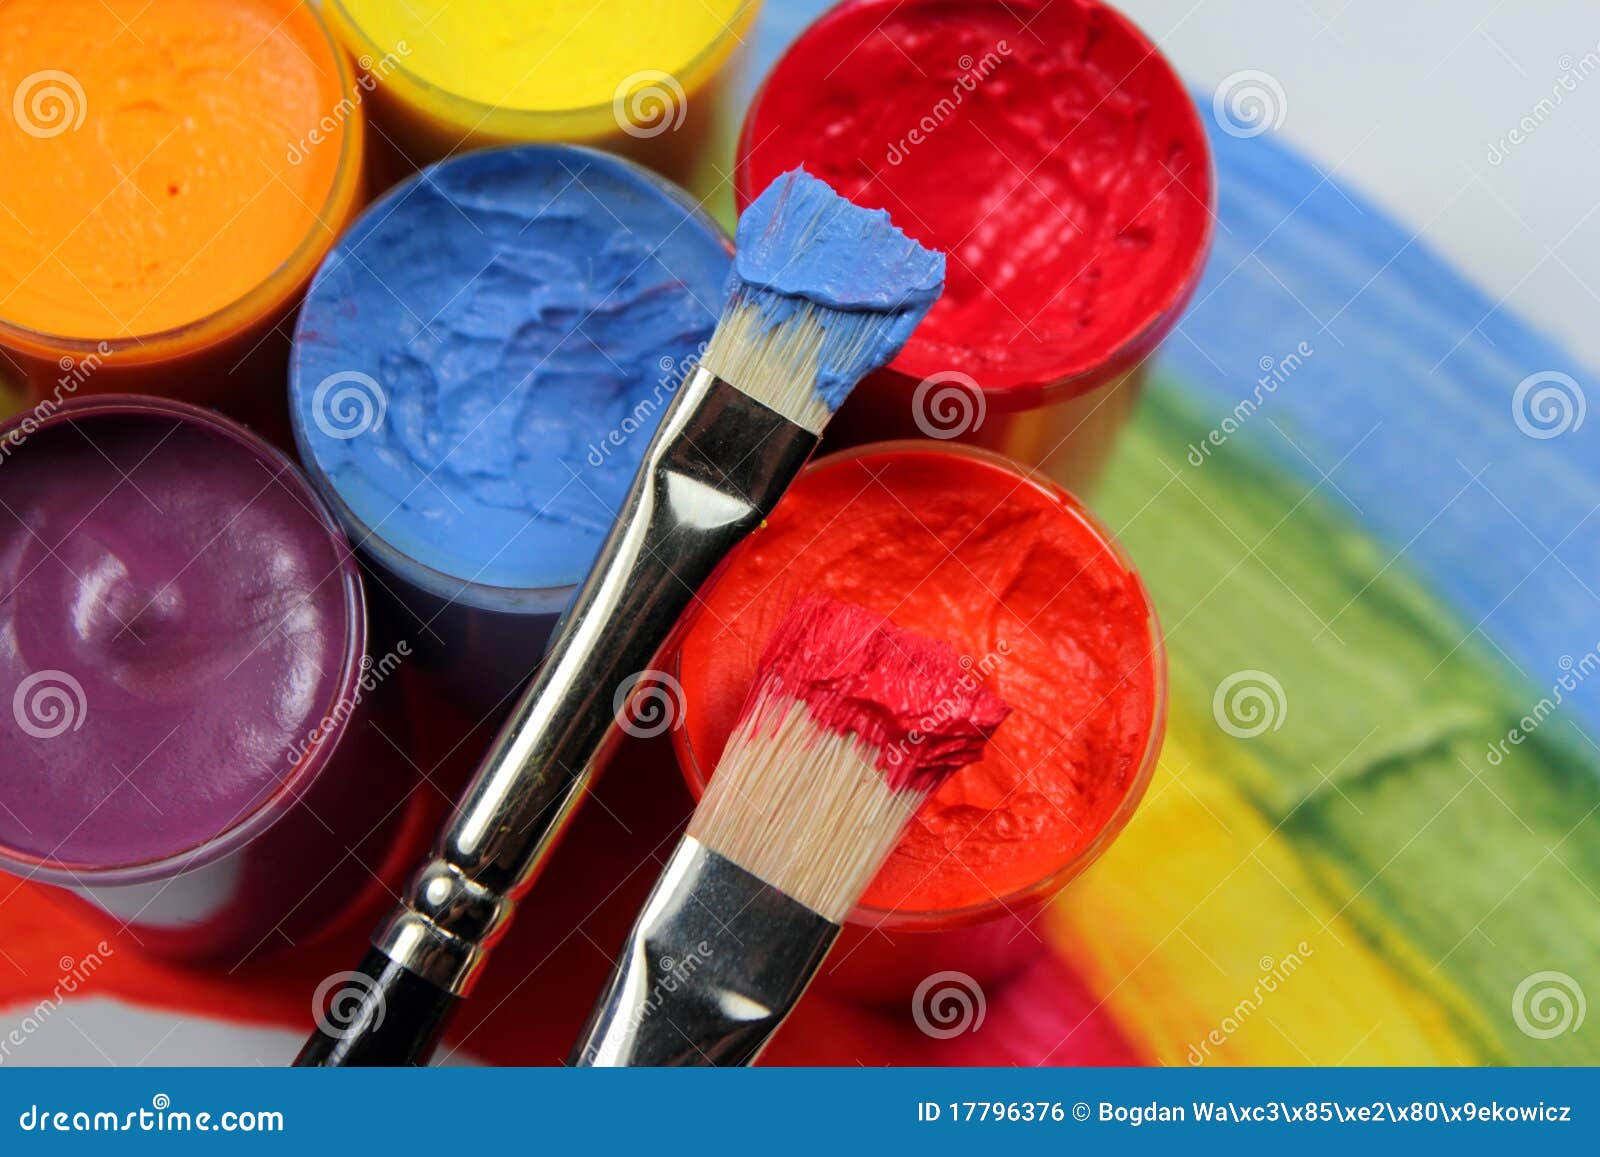 Color paint stock photo. Image of artistic, canvas, colorful - 17796376